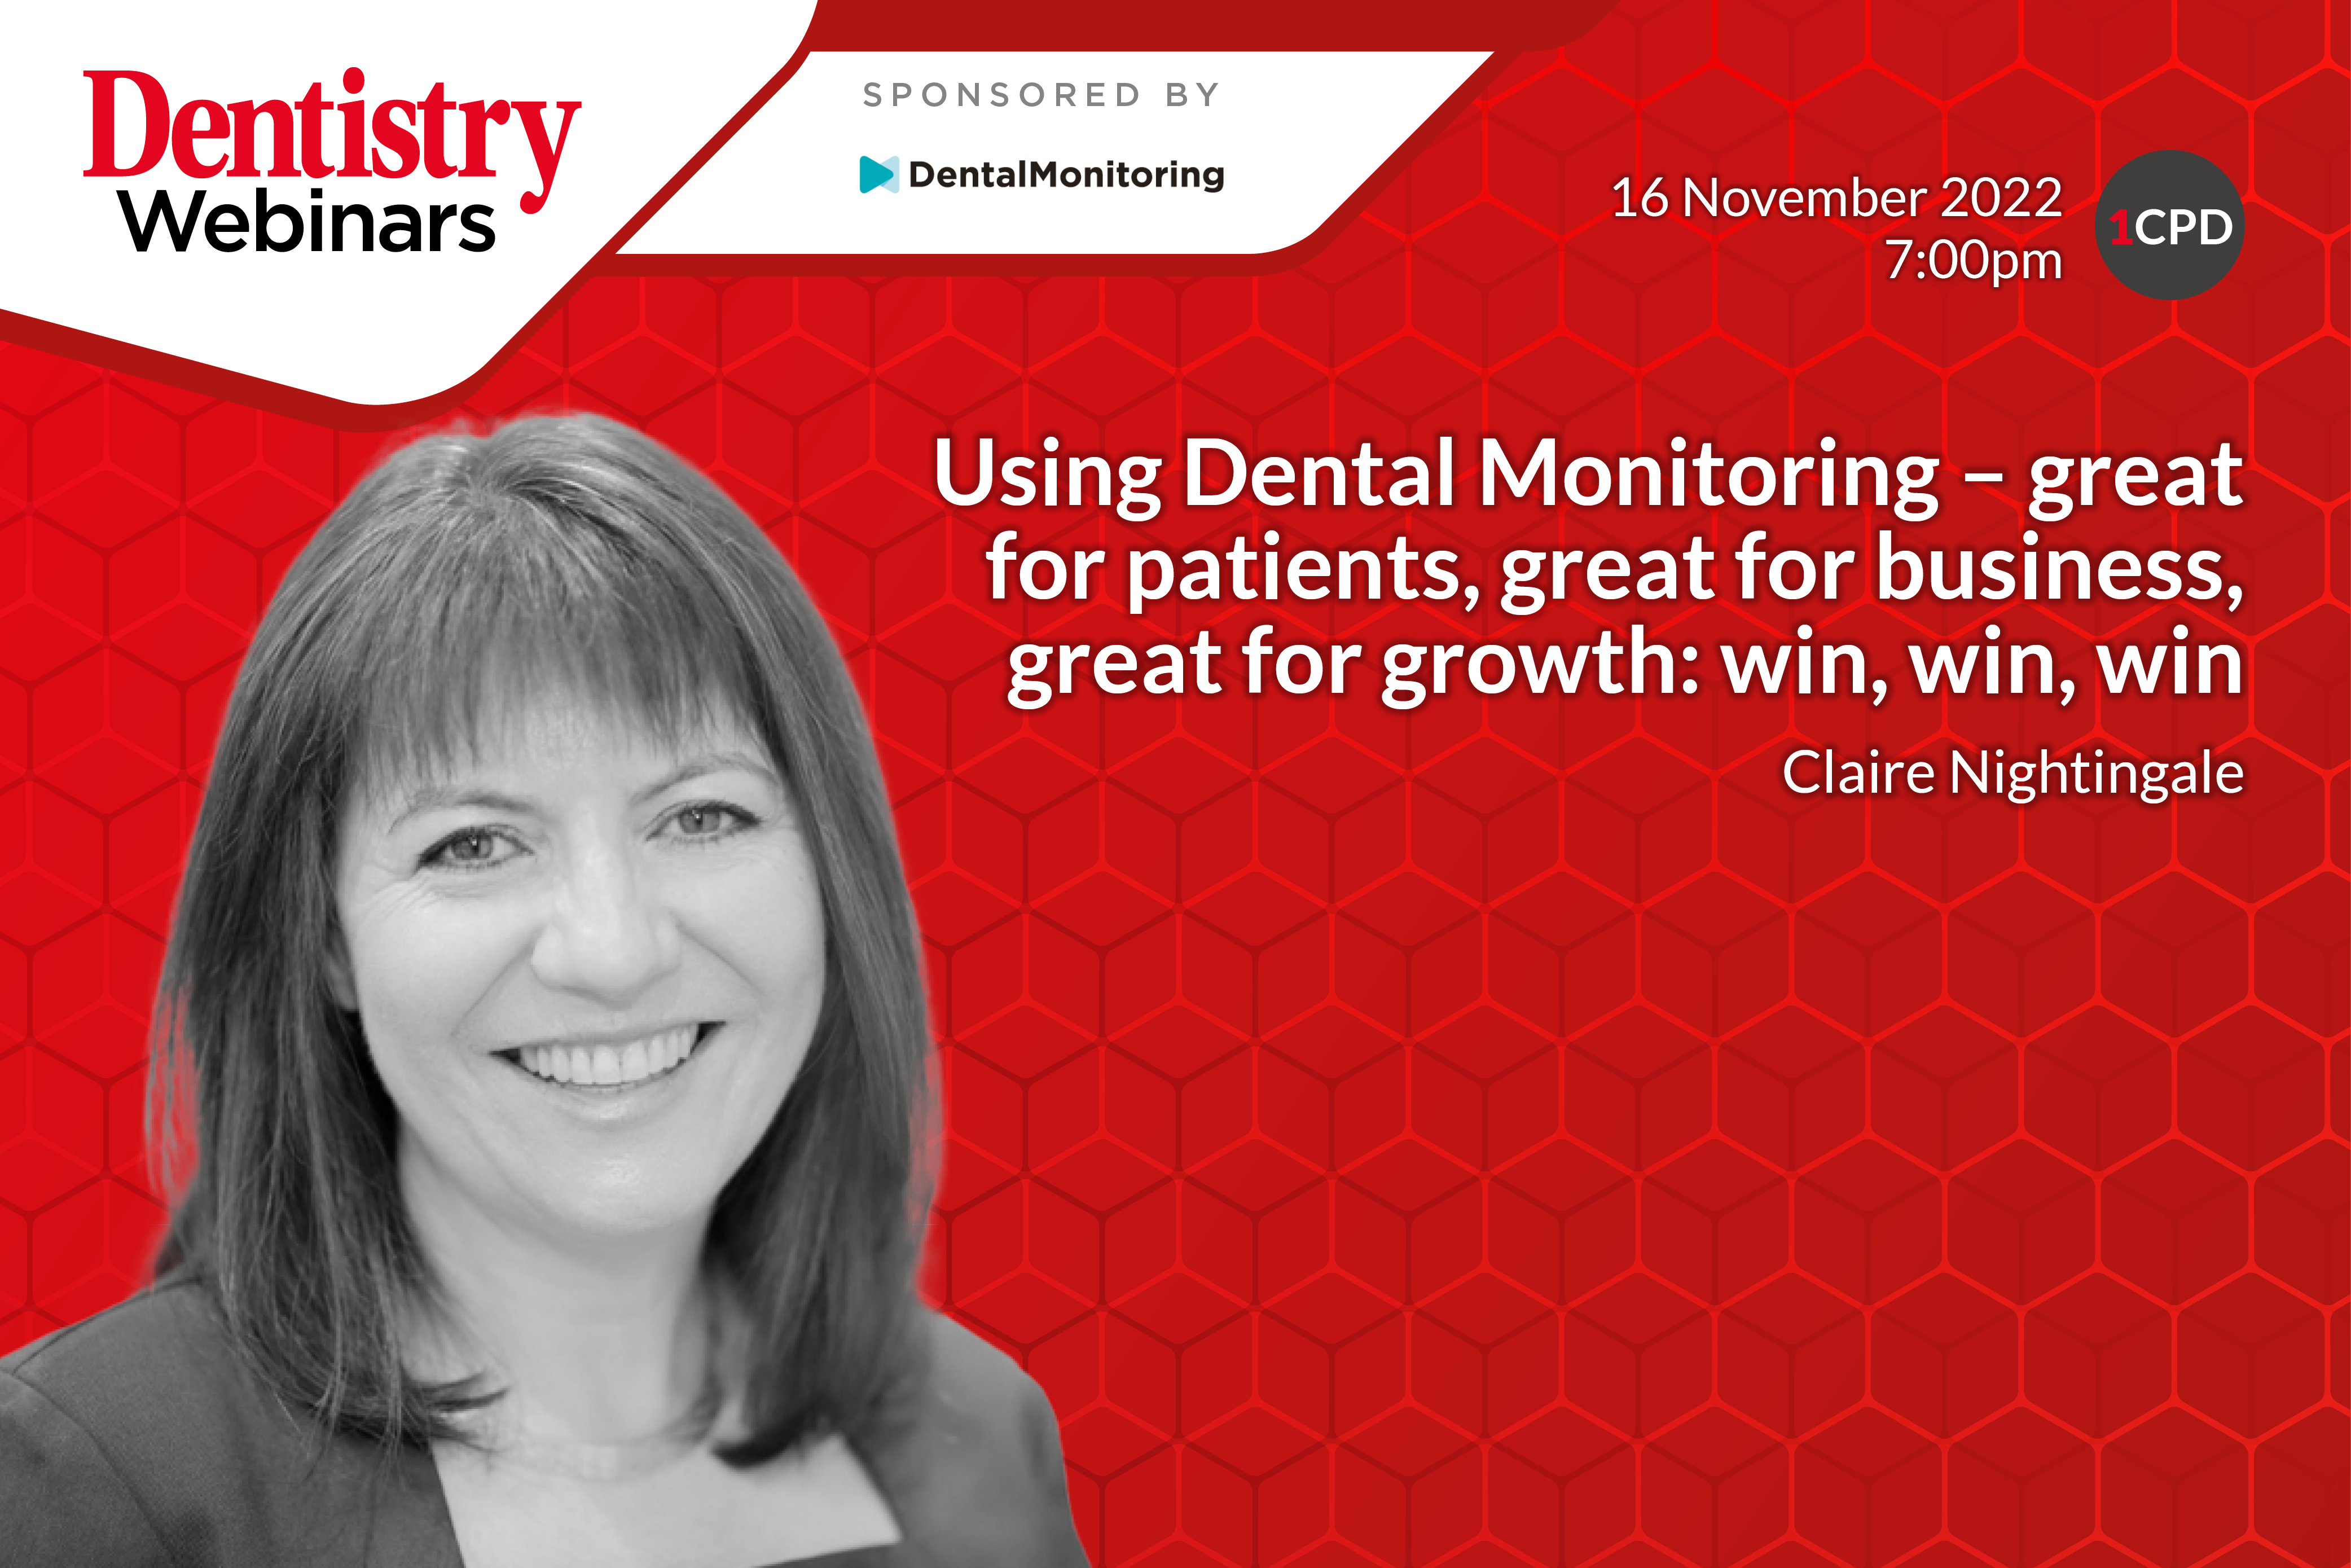 Join Claire Nightingale on Wednesday 16 November as she discusses how using dental monitoring is great for patients, business and growth. 